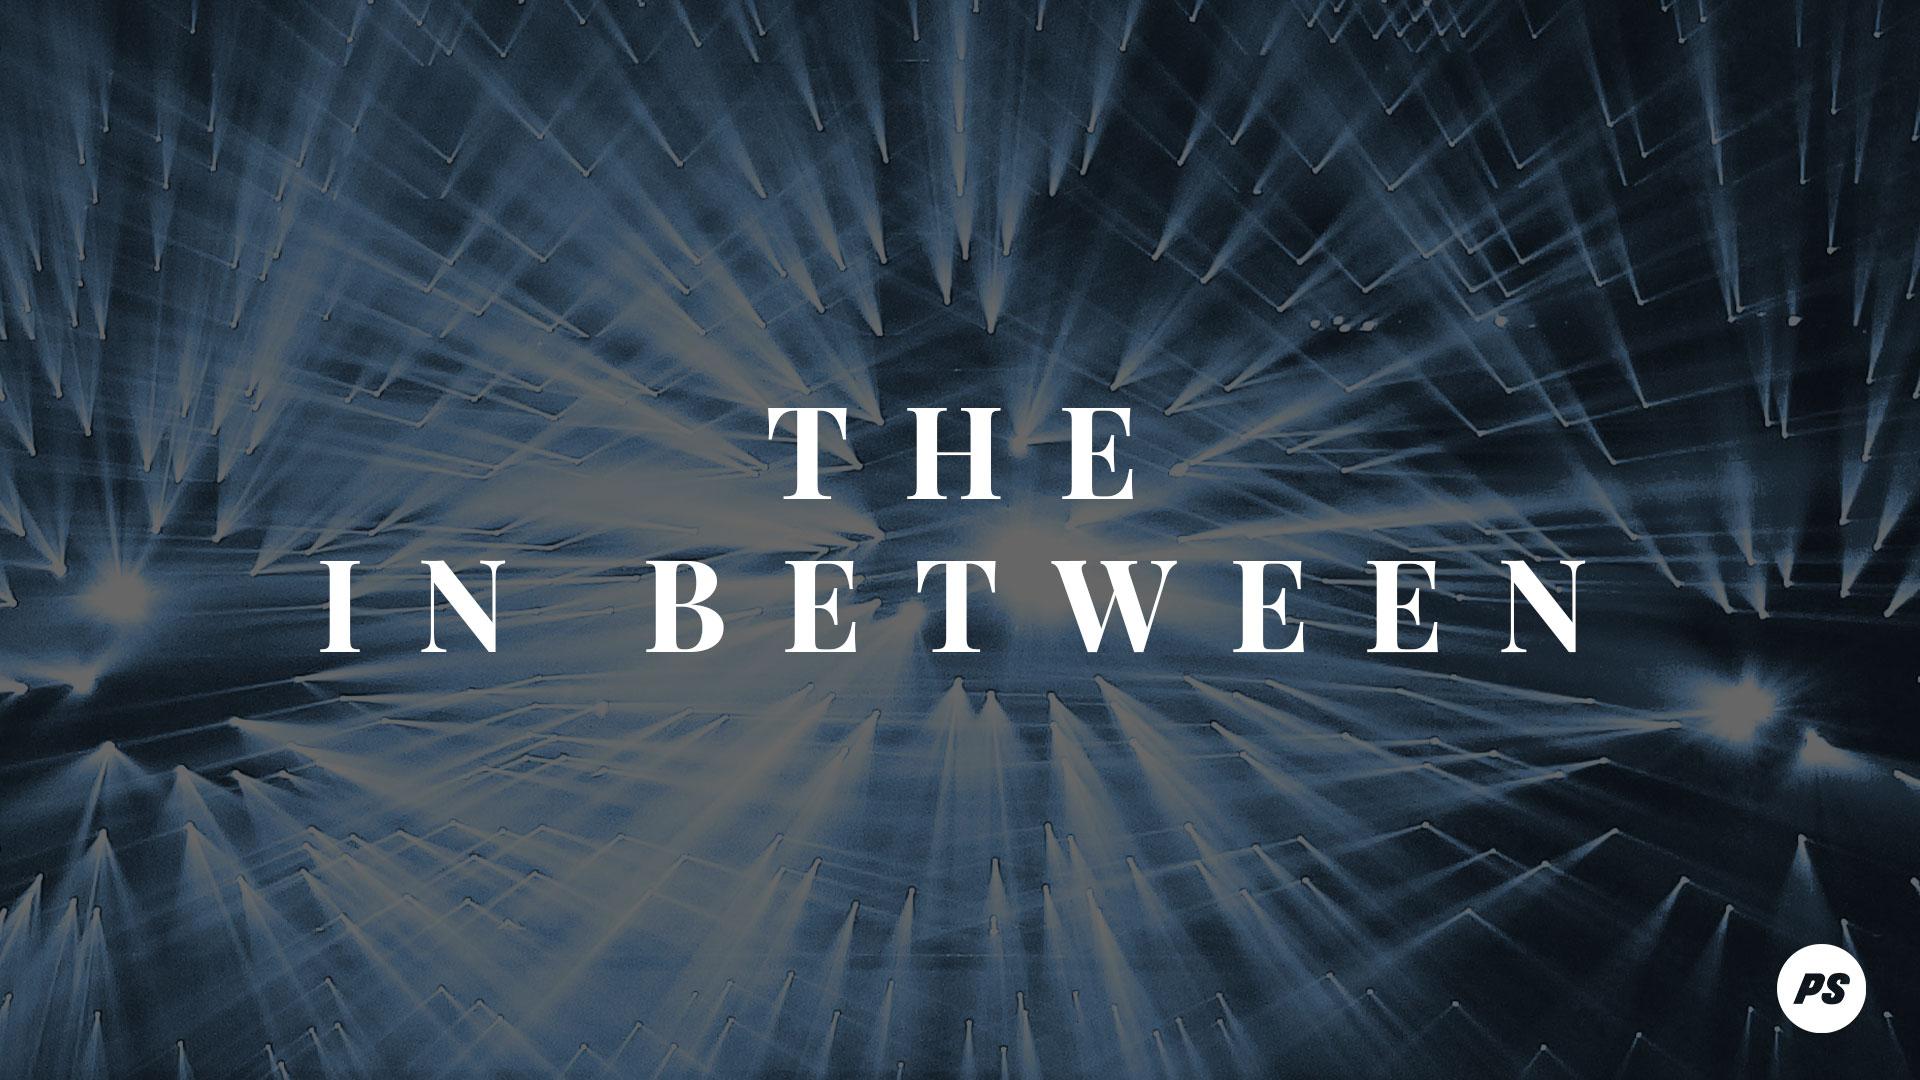 Featured Image for “The In Between”